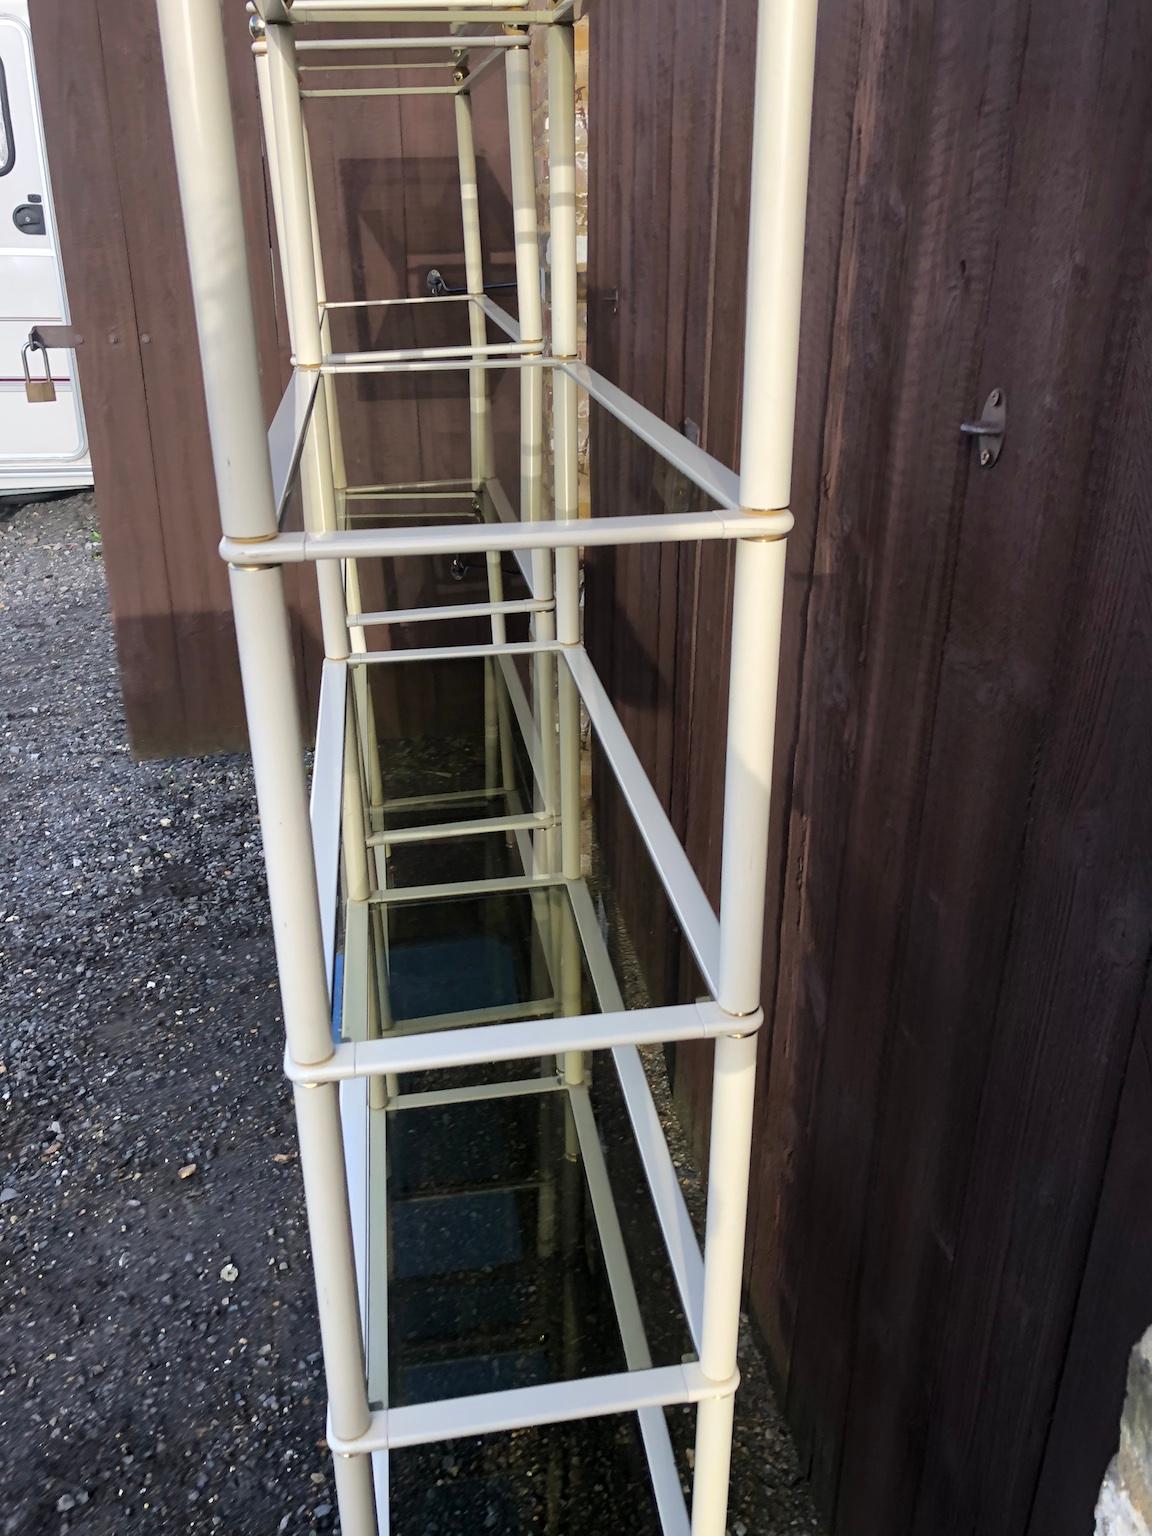 Midcentury Cream and Gold Metal Shelving Units, Italian, 1980s For Sale 2